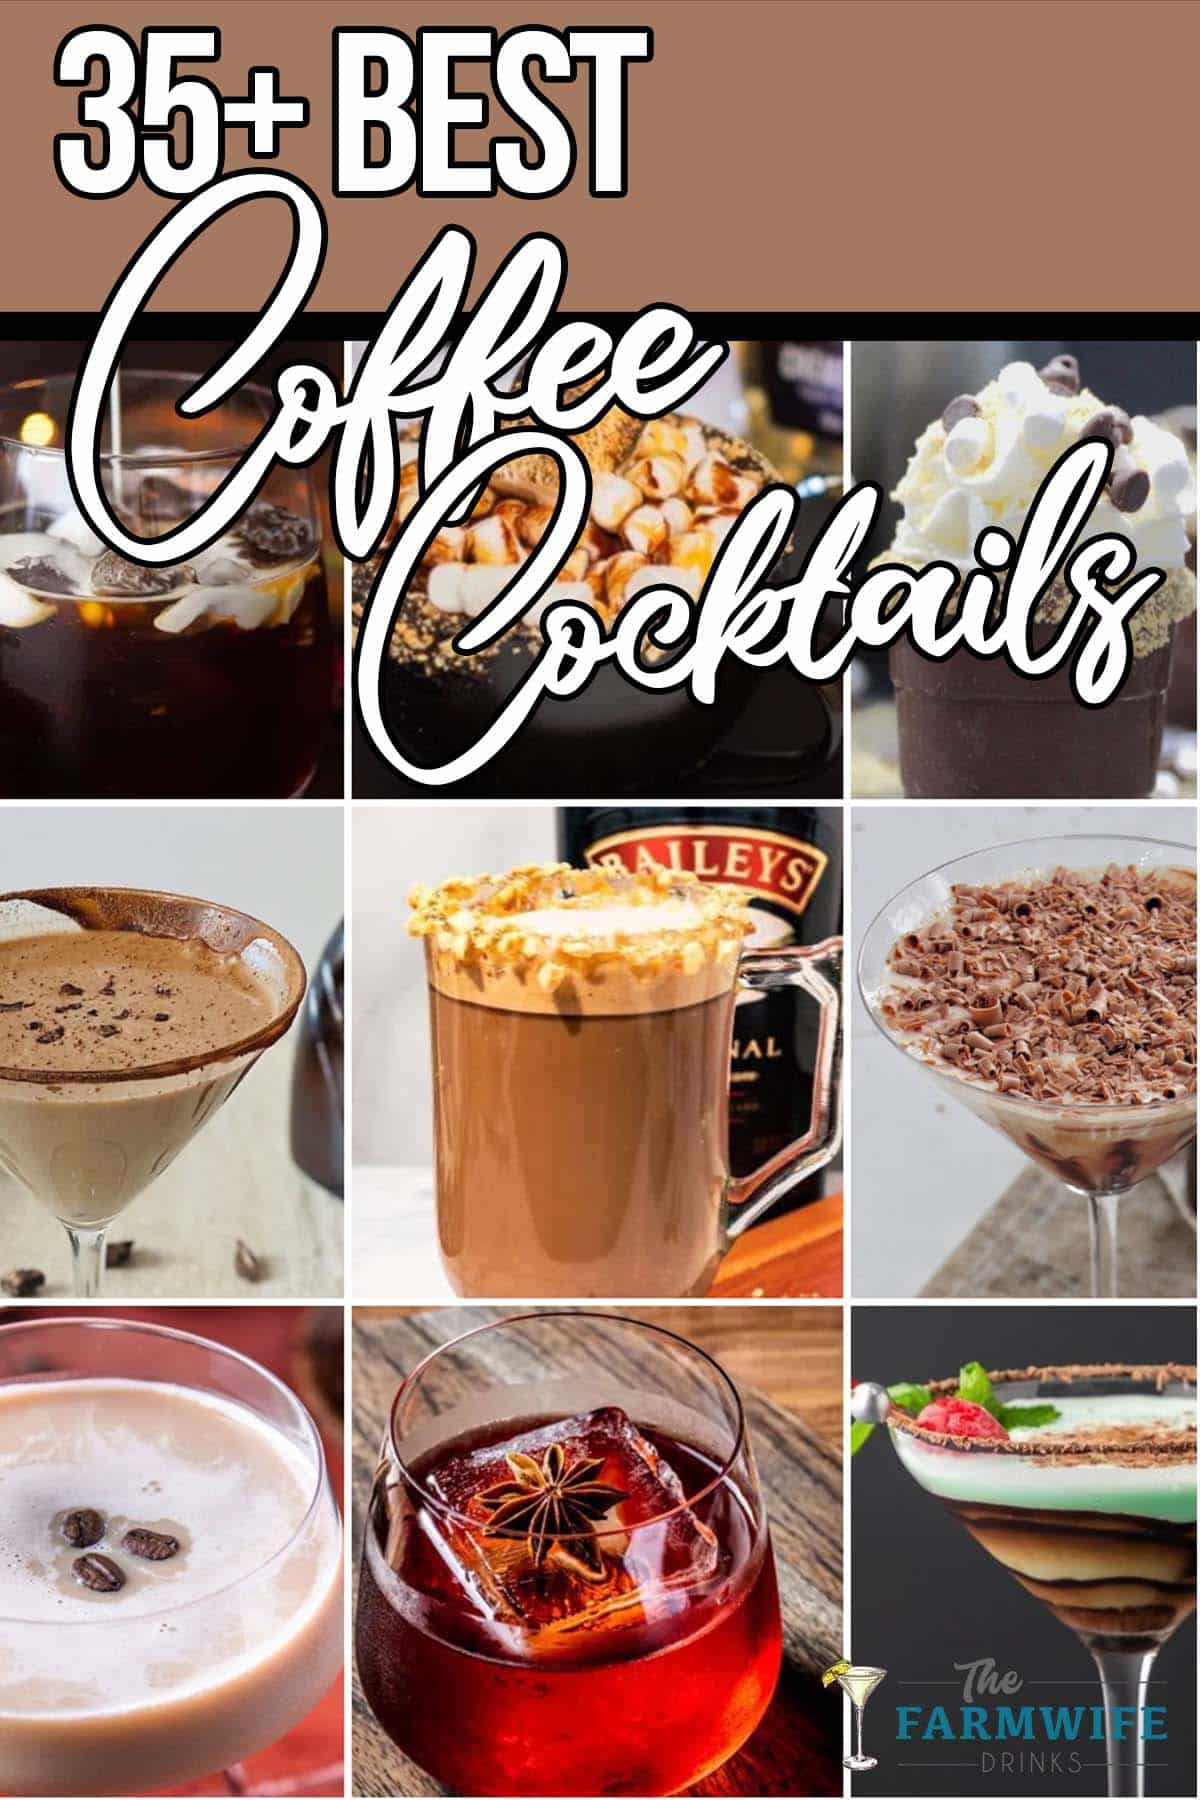 photo collage of coffee based drink recipes with text which reads 35+ best coffee cocktails